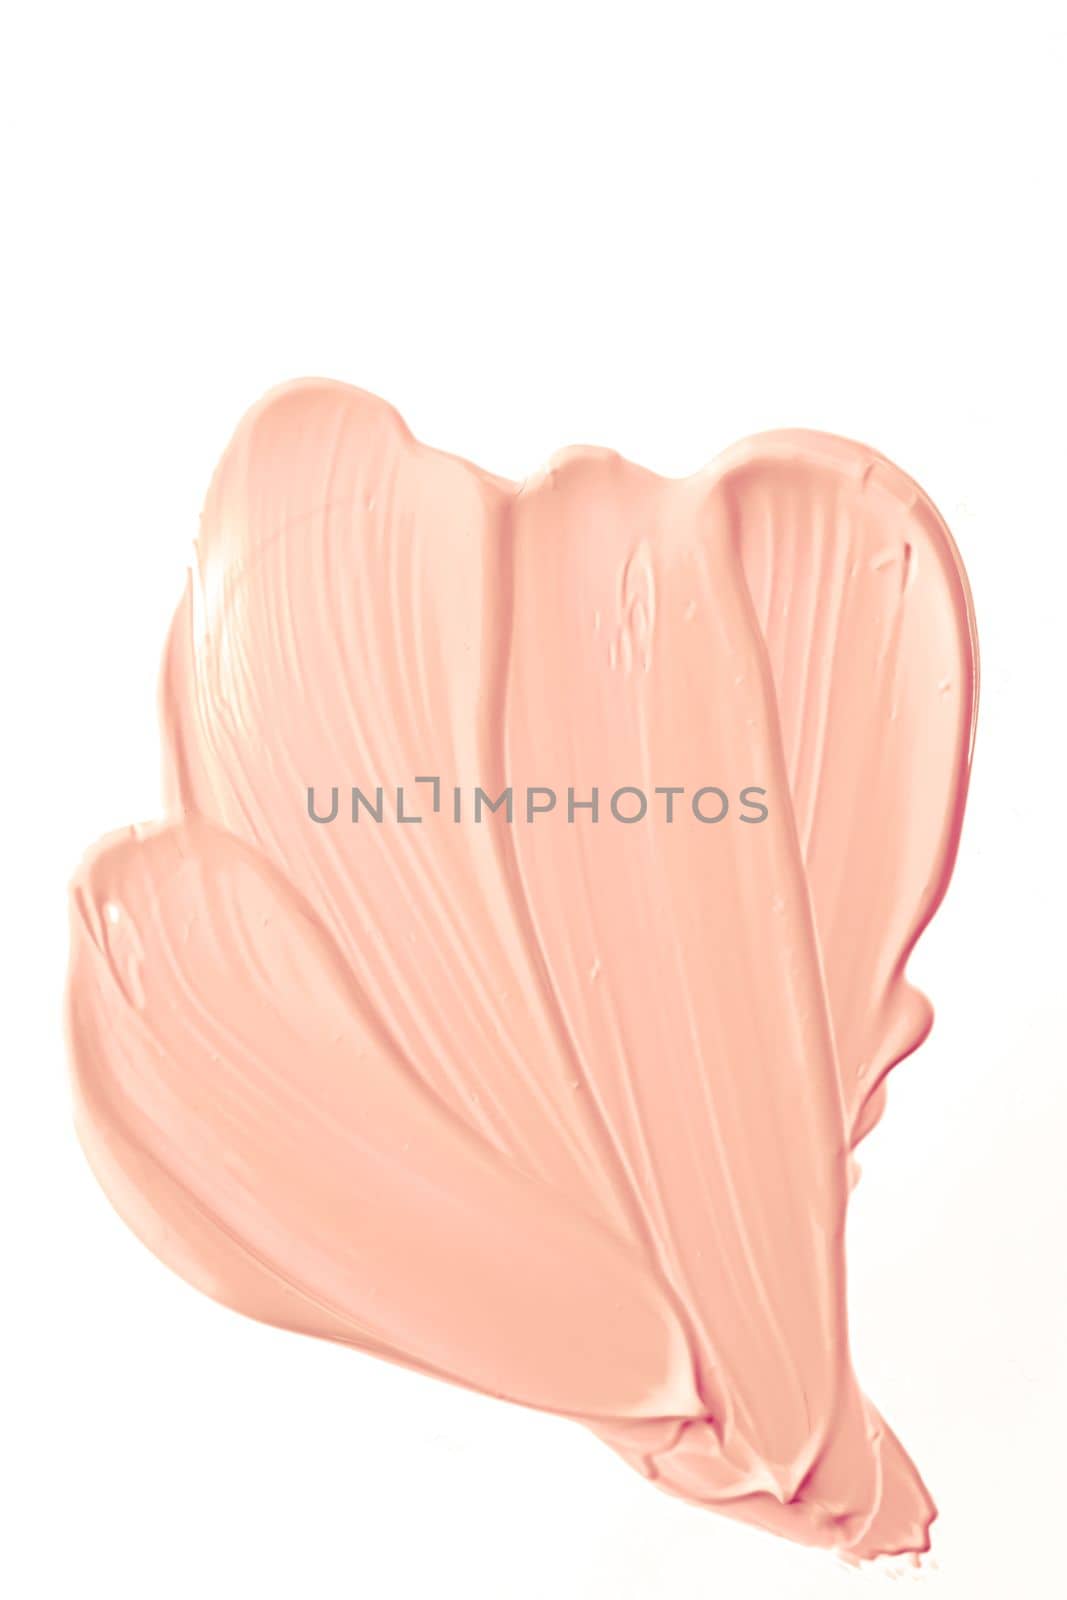 Pastel orange beauty swatch, skincare and makeup cosmetic product sample texture isolated on white background, make-up smudge, cream cosmetics smear or paint brush stroke closeup